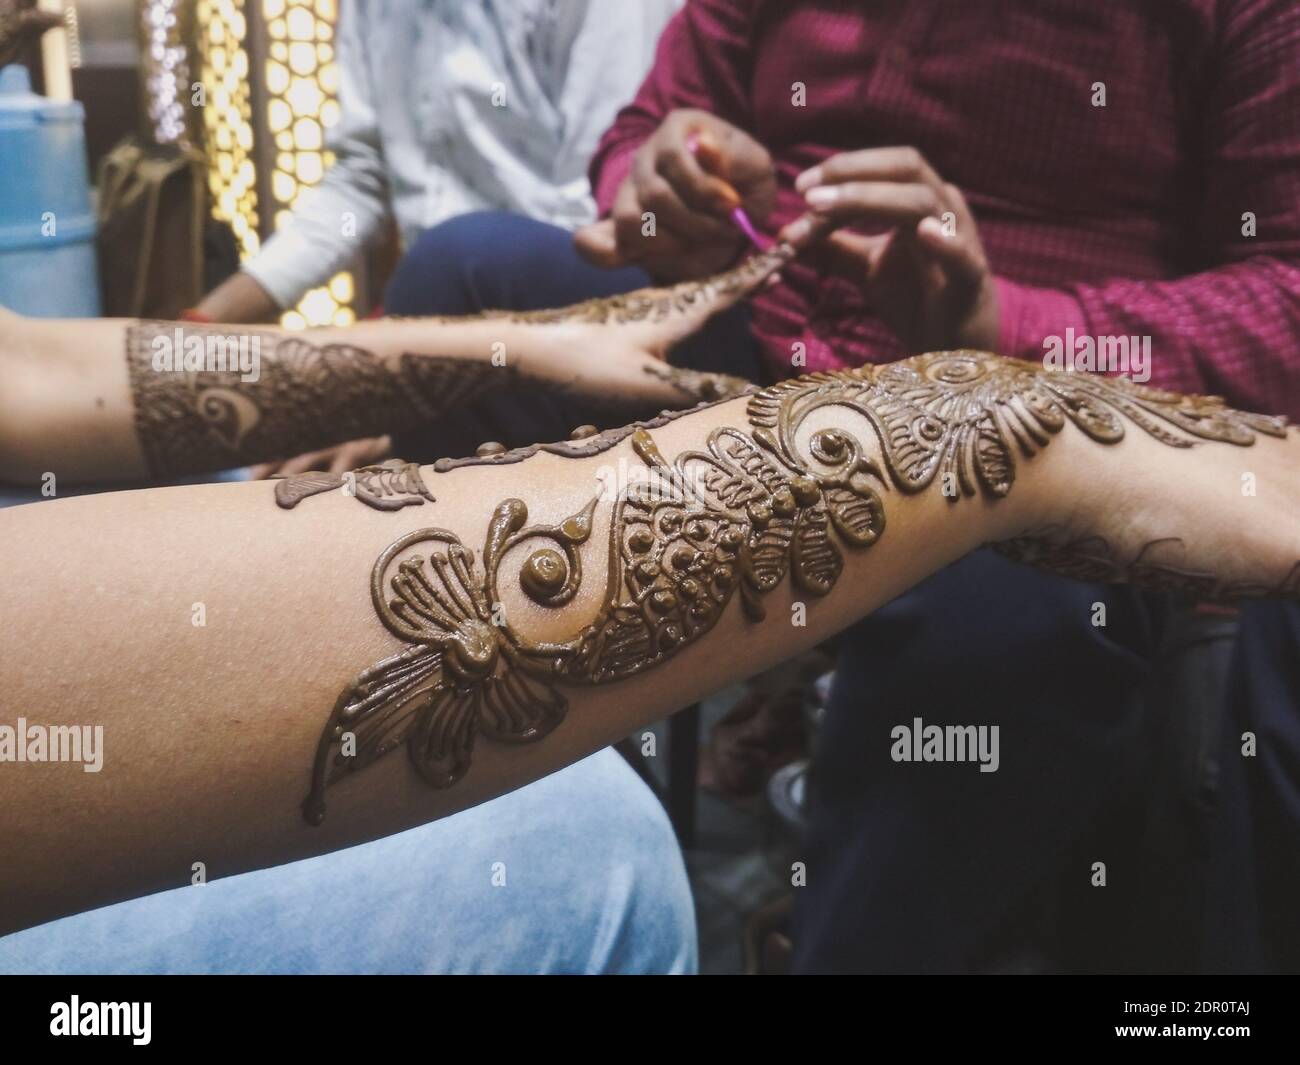 Henna Business Names